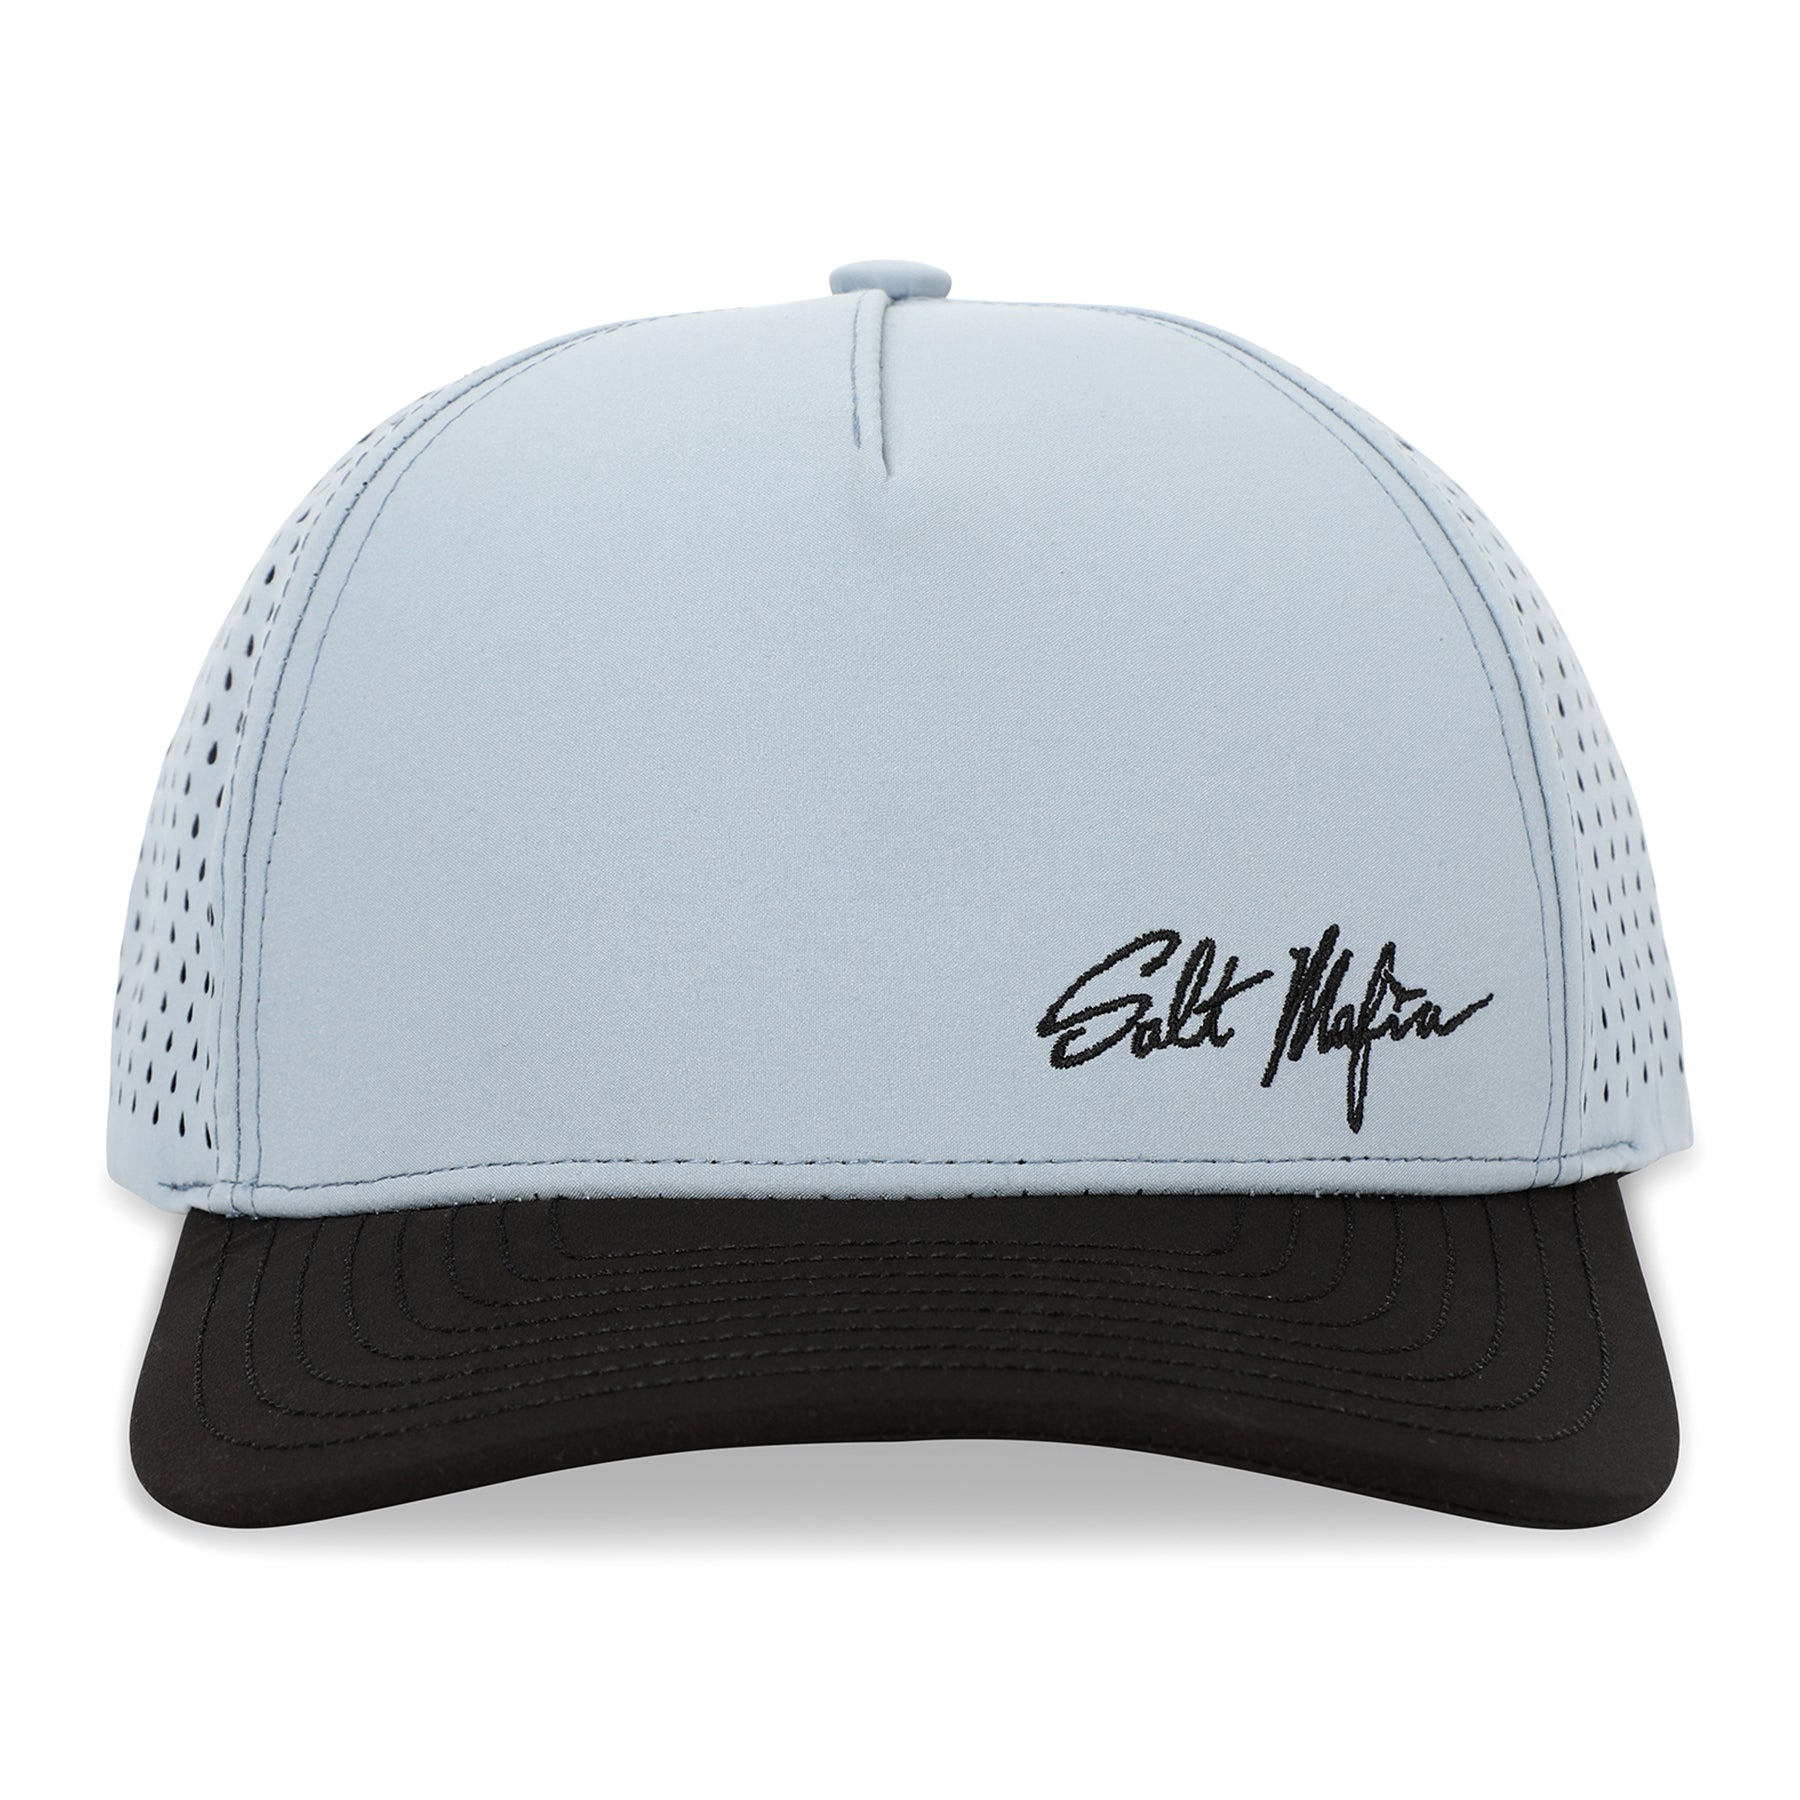 Salt Mafia Performance Hat - The S-Sky (curved) - Seamless Collection